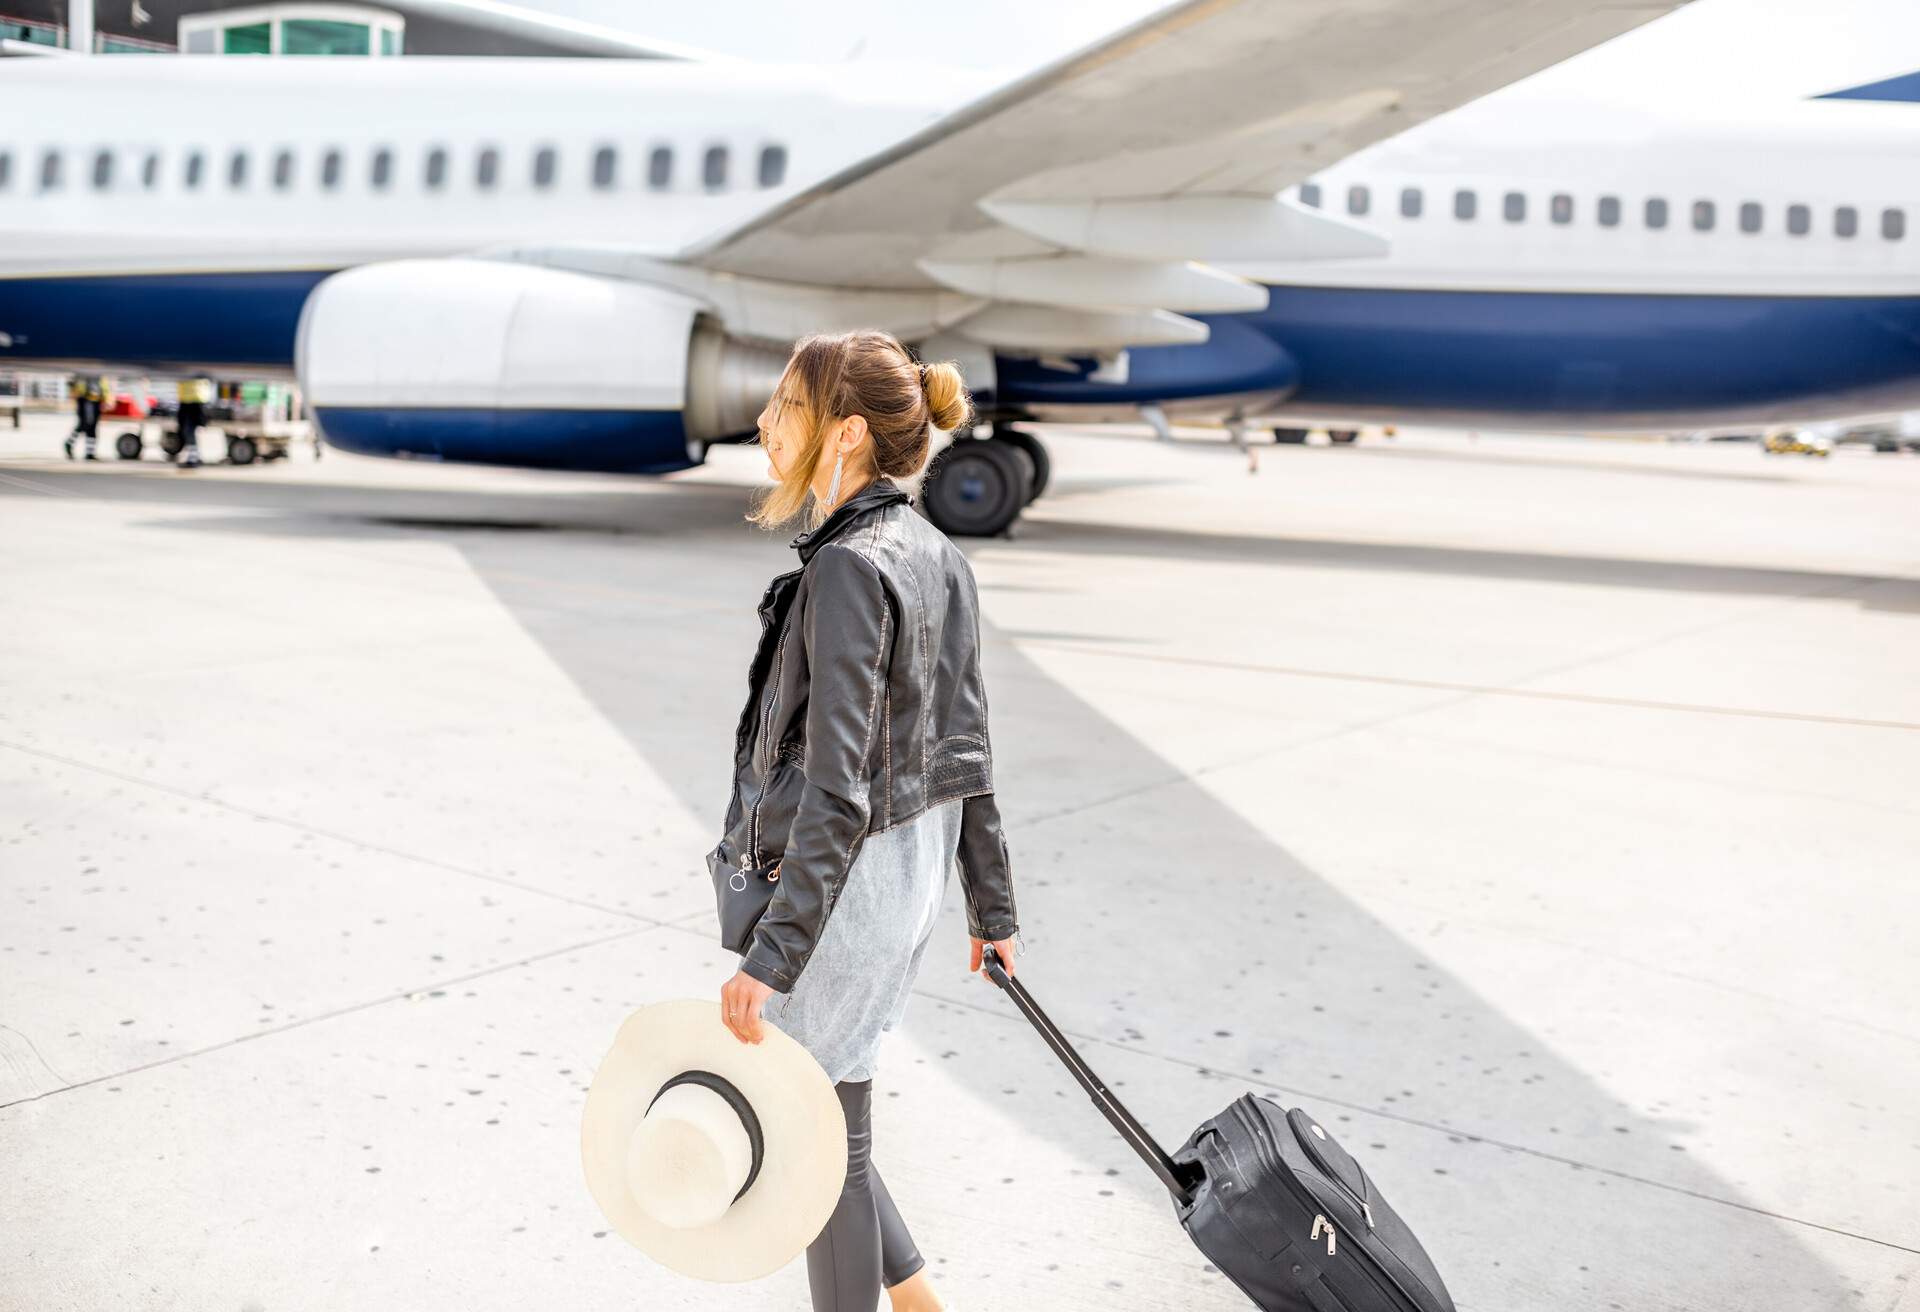 Woman boarding flight with carry on luggage and hat